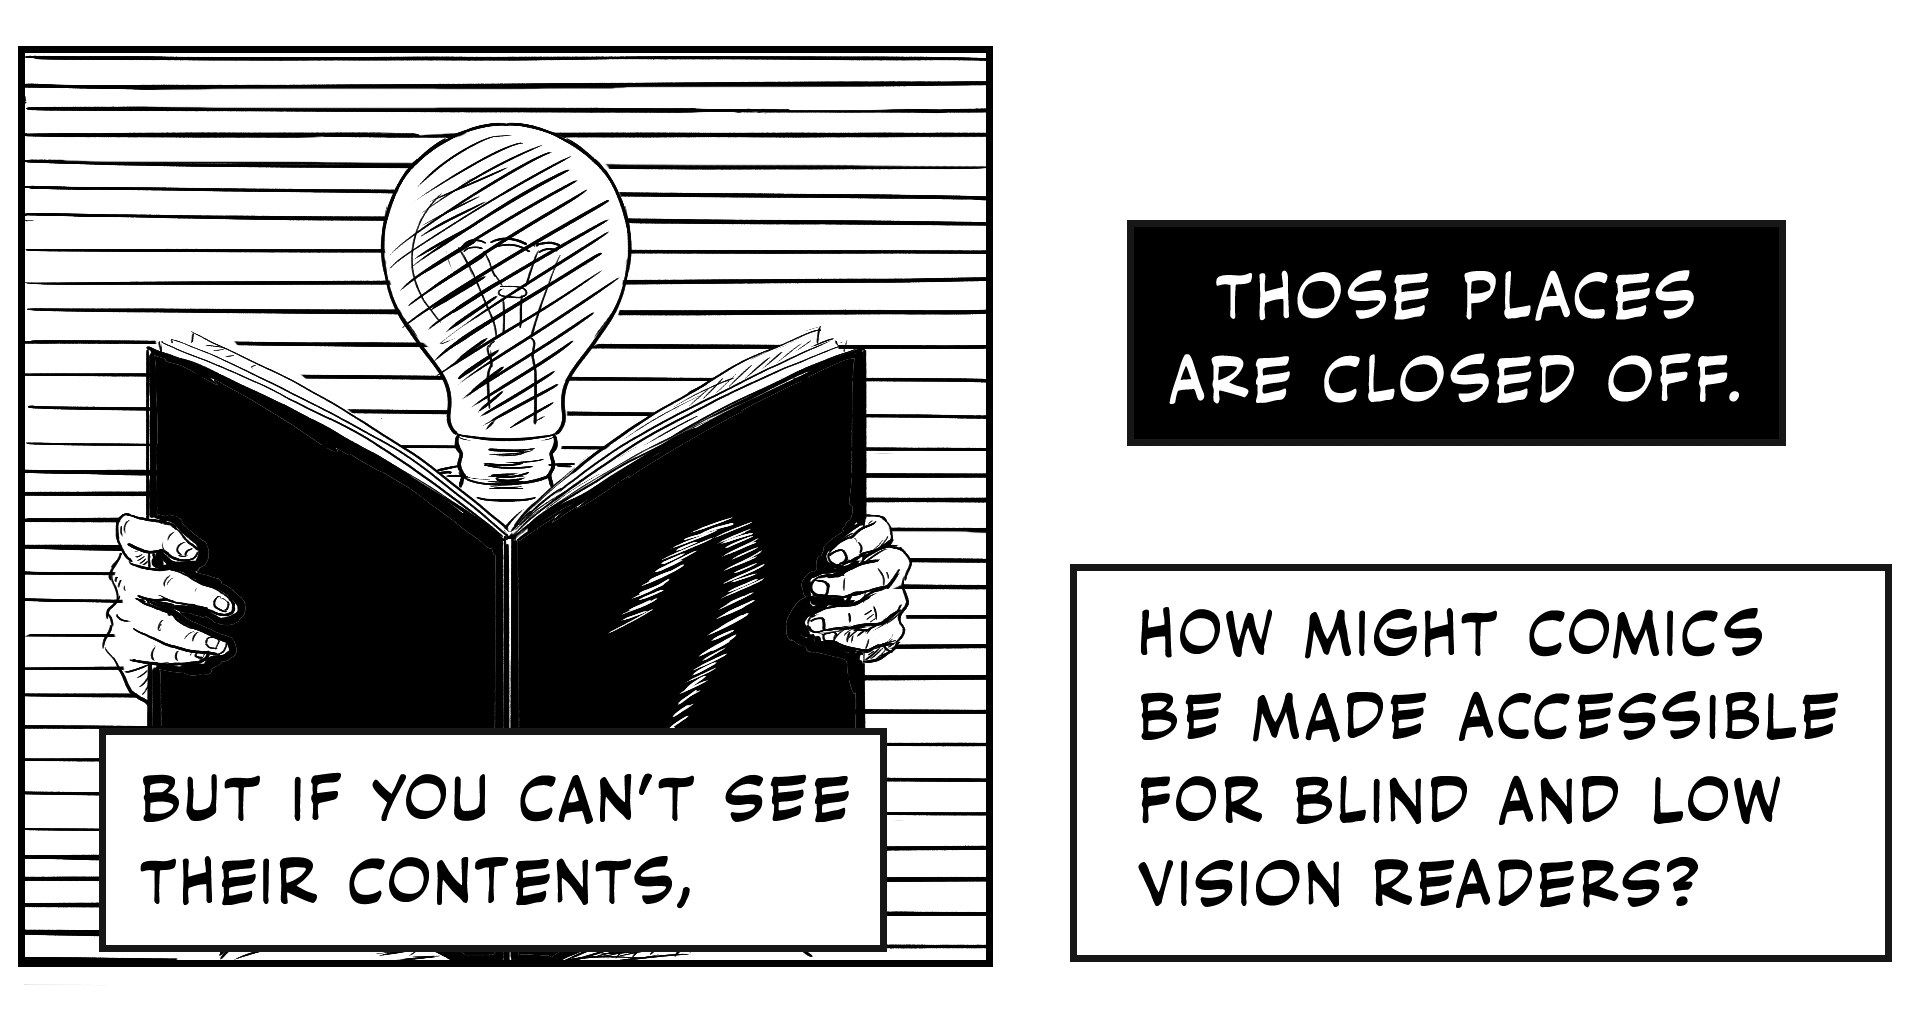 Panel 2: Same picture, but the lightbulb no longer illuminated, the comic’s cover blacked out except for a thin wisp of a question mark. Caption “But if you can’t see their contents…”  Panel 3: White text on a black box reads “those places are closed off.” A white box reads “How might comics be made accessible for blind and low vision readers?”